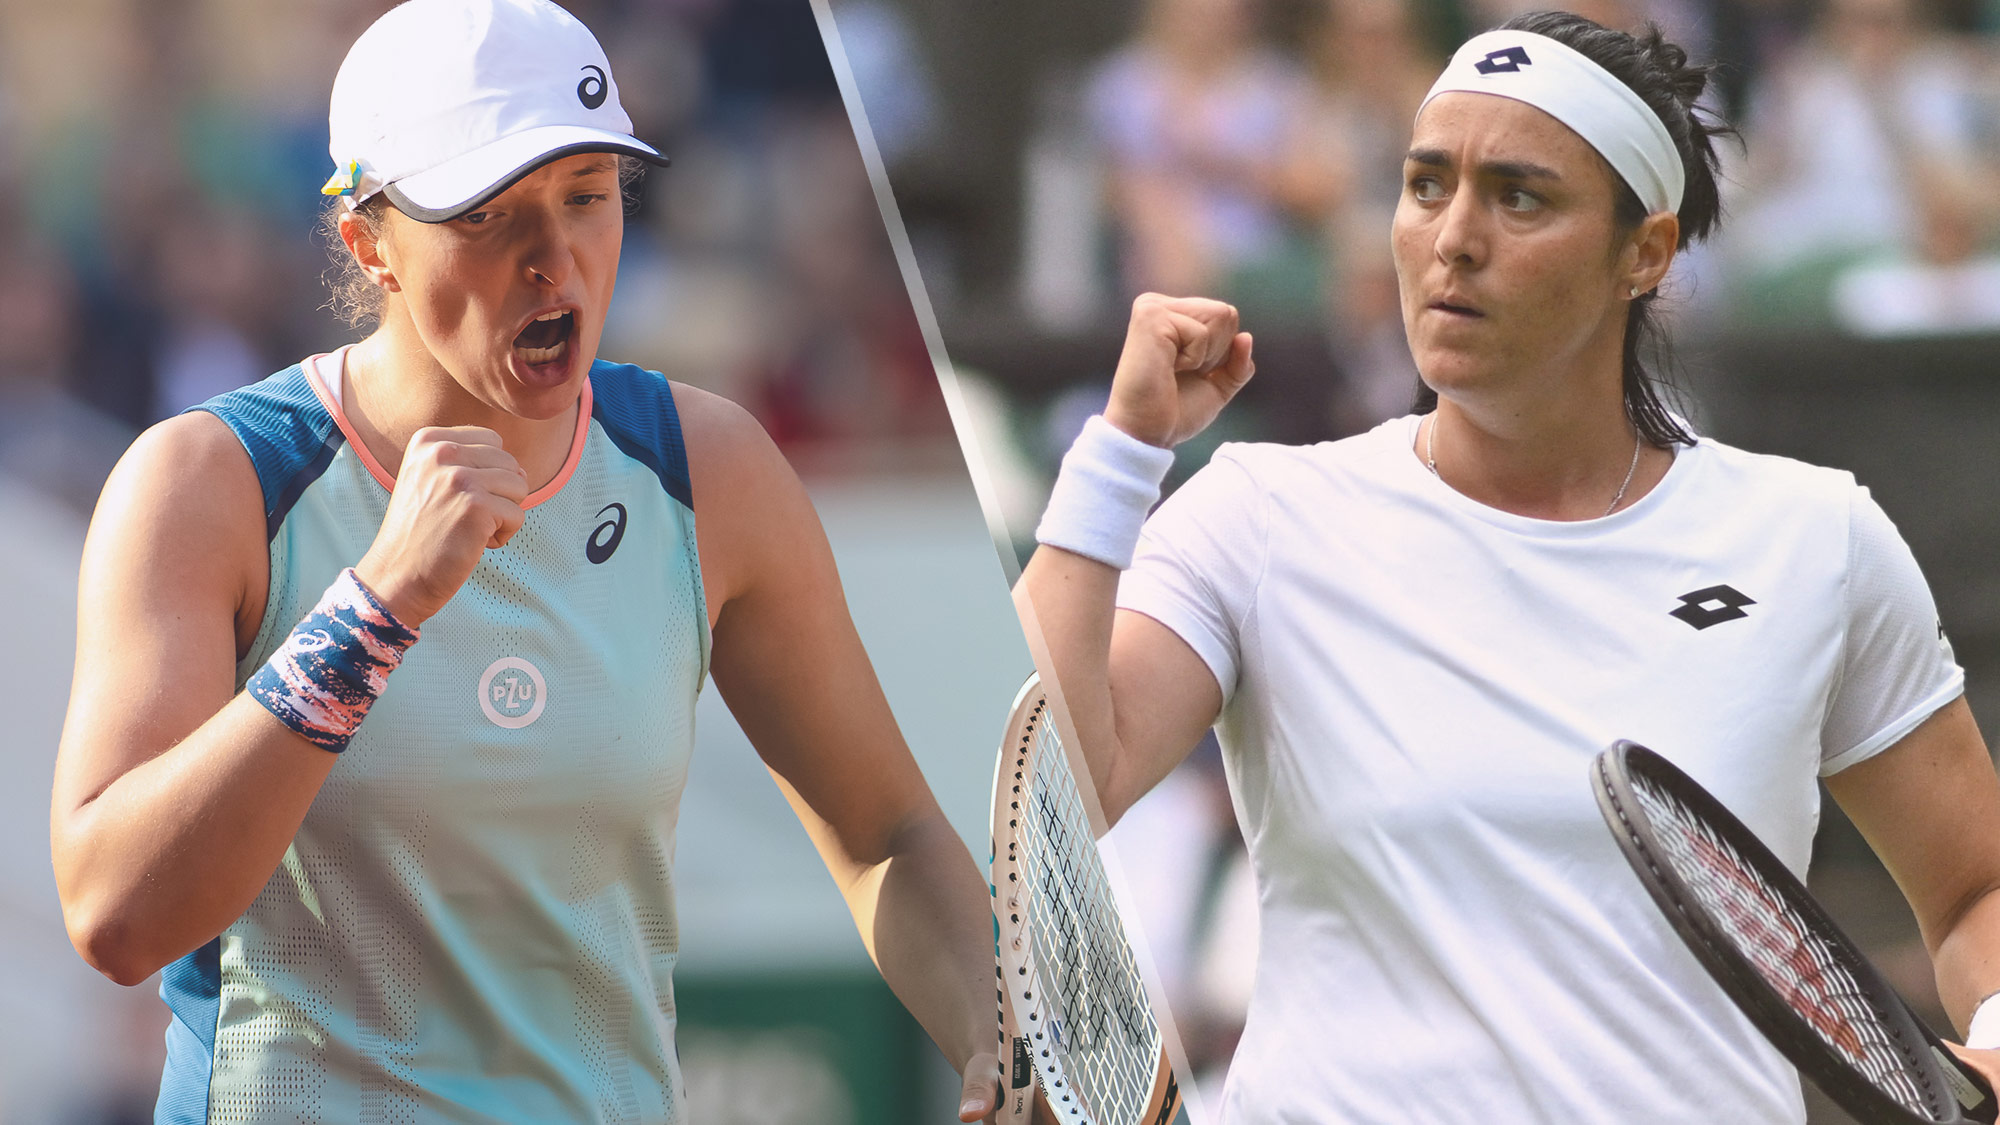 Iga Swiatek vs Ons Jabeur live stream and how to watch the US Open women's  final live | Tom's Guide